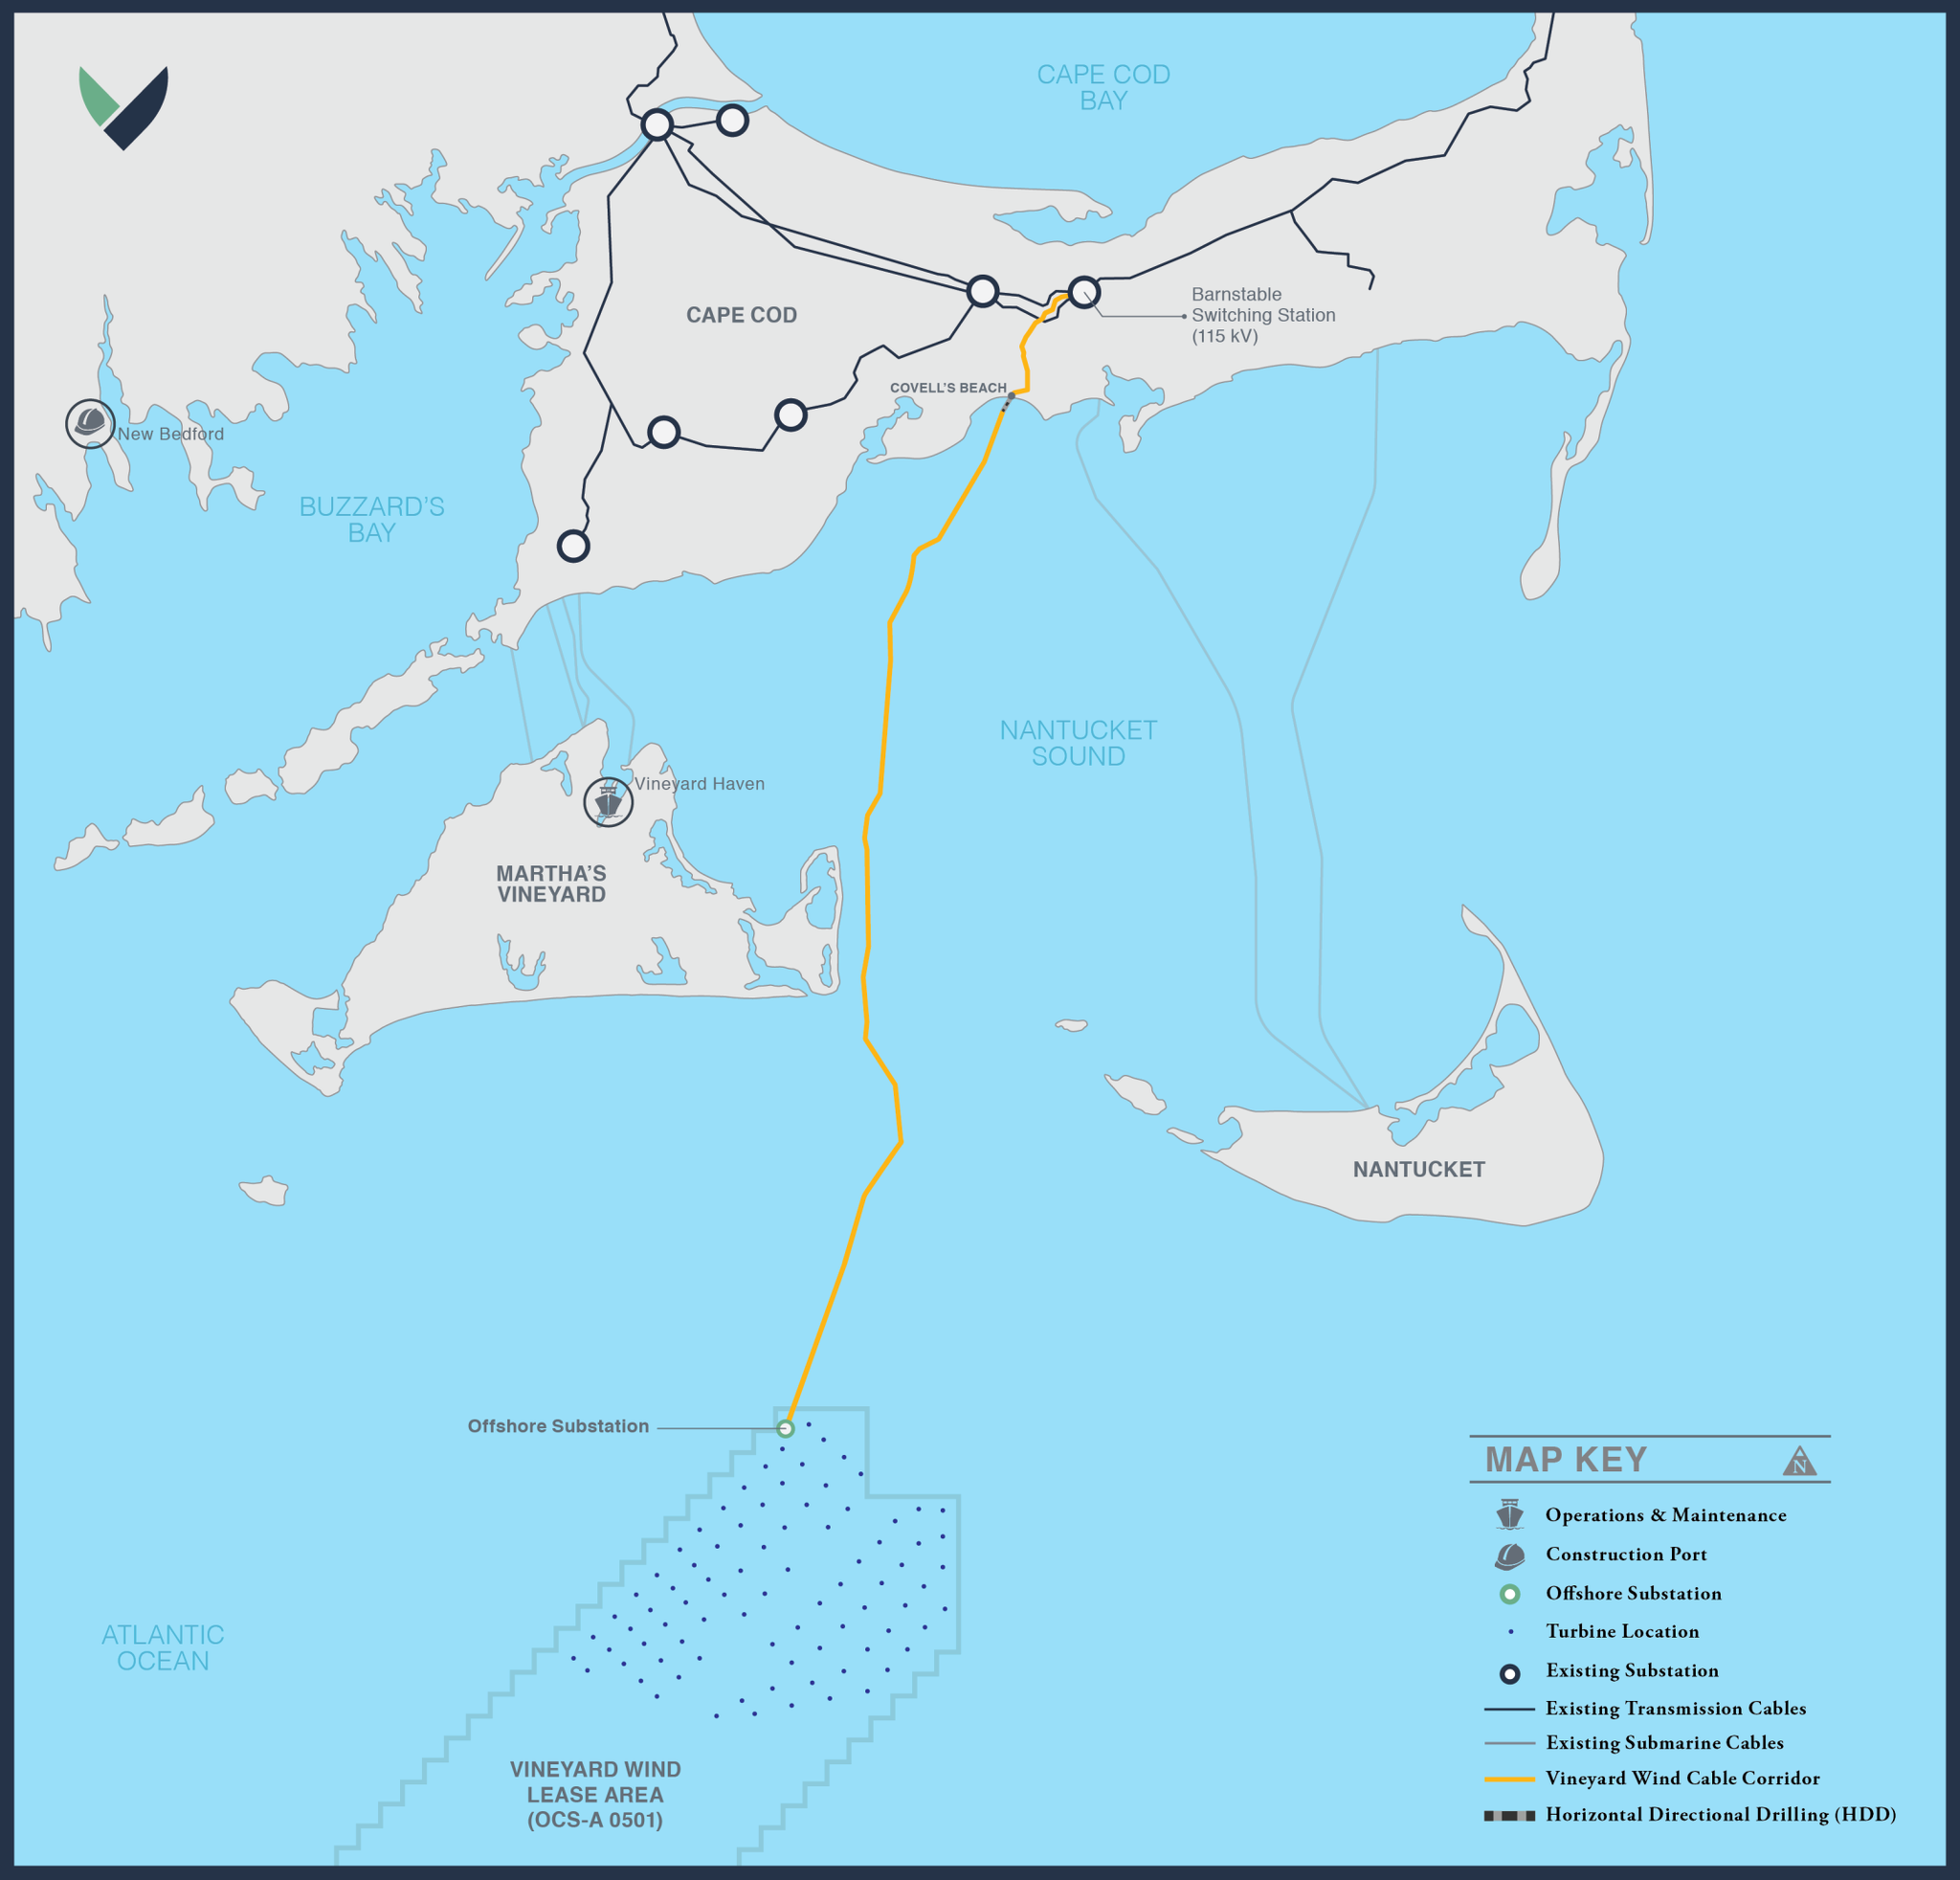 The proposed Vineyard Wind project would be roughly 15 miles offshore and include 9.5 MW turbines. Source: Vineyard Wind